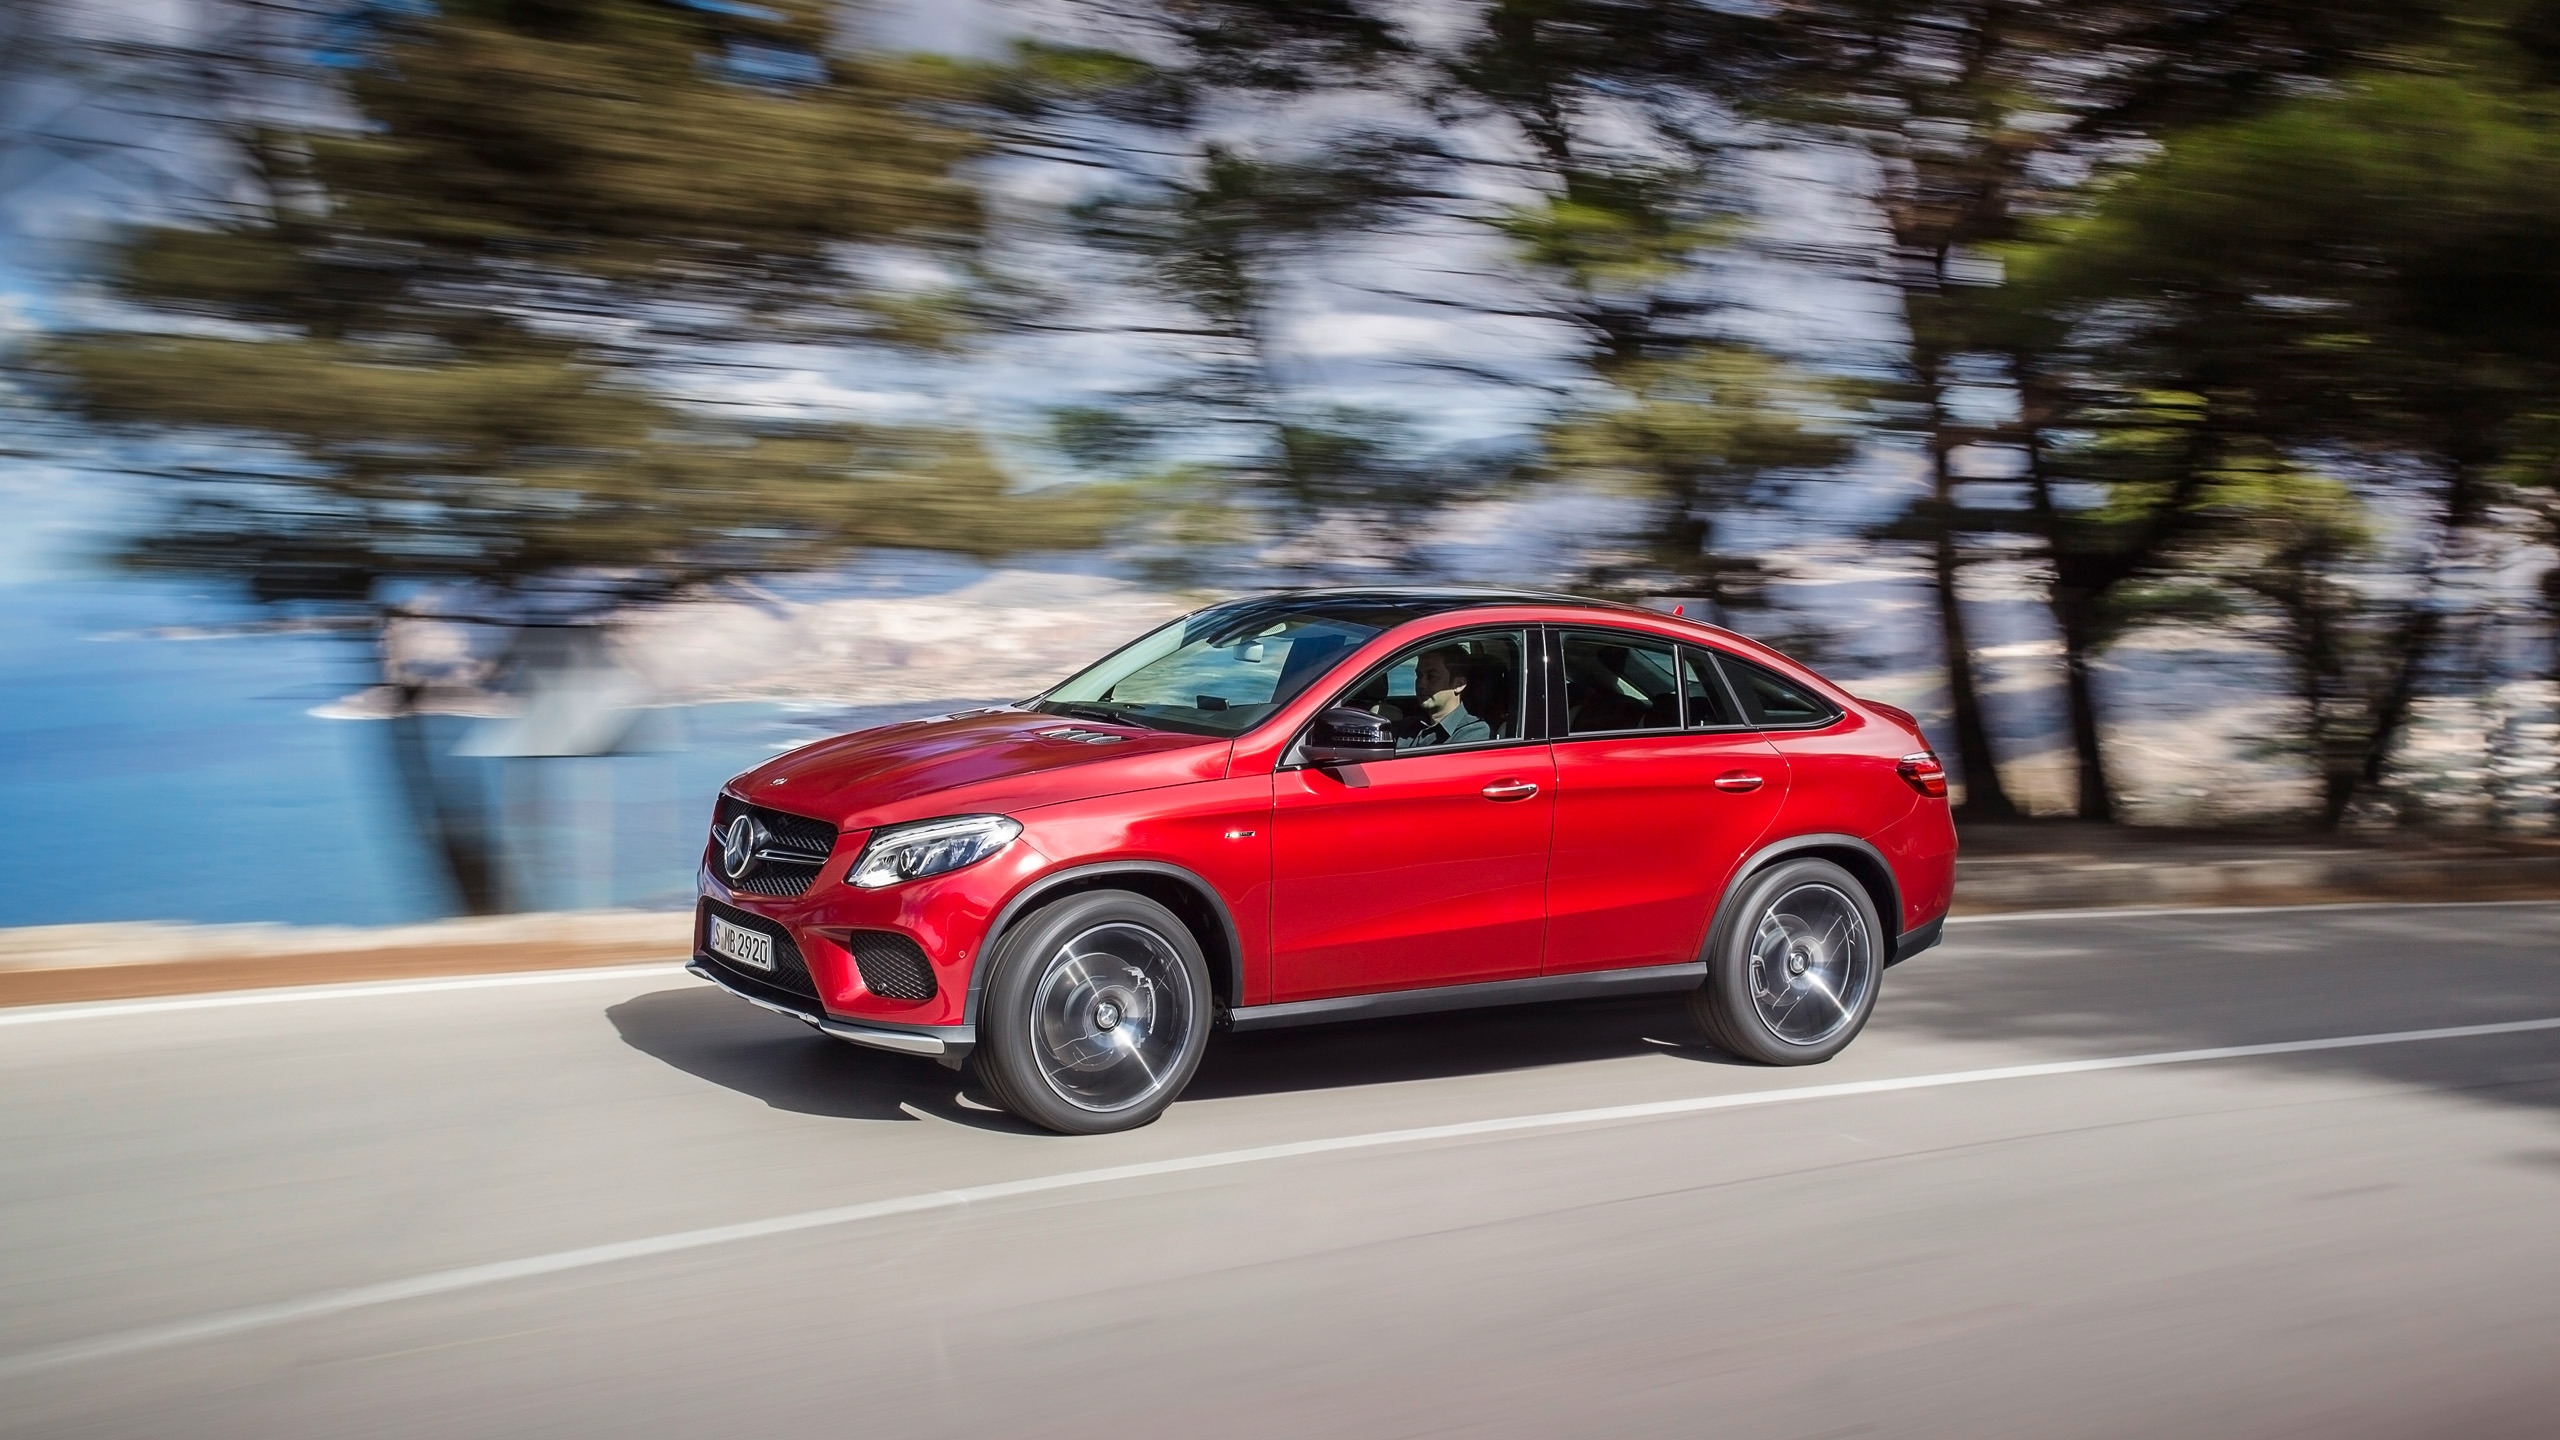 Mercedes Benz GLE Coupe for 2560x1440 HDTV resolution